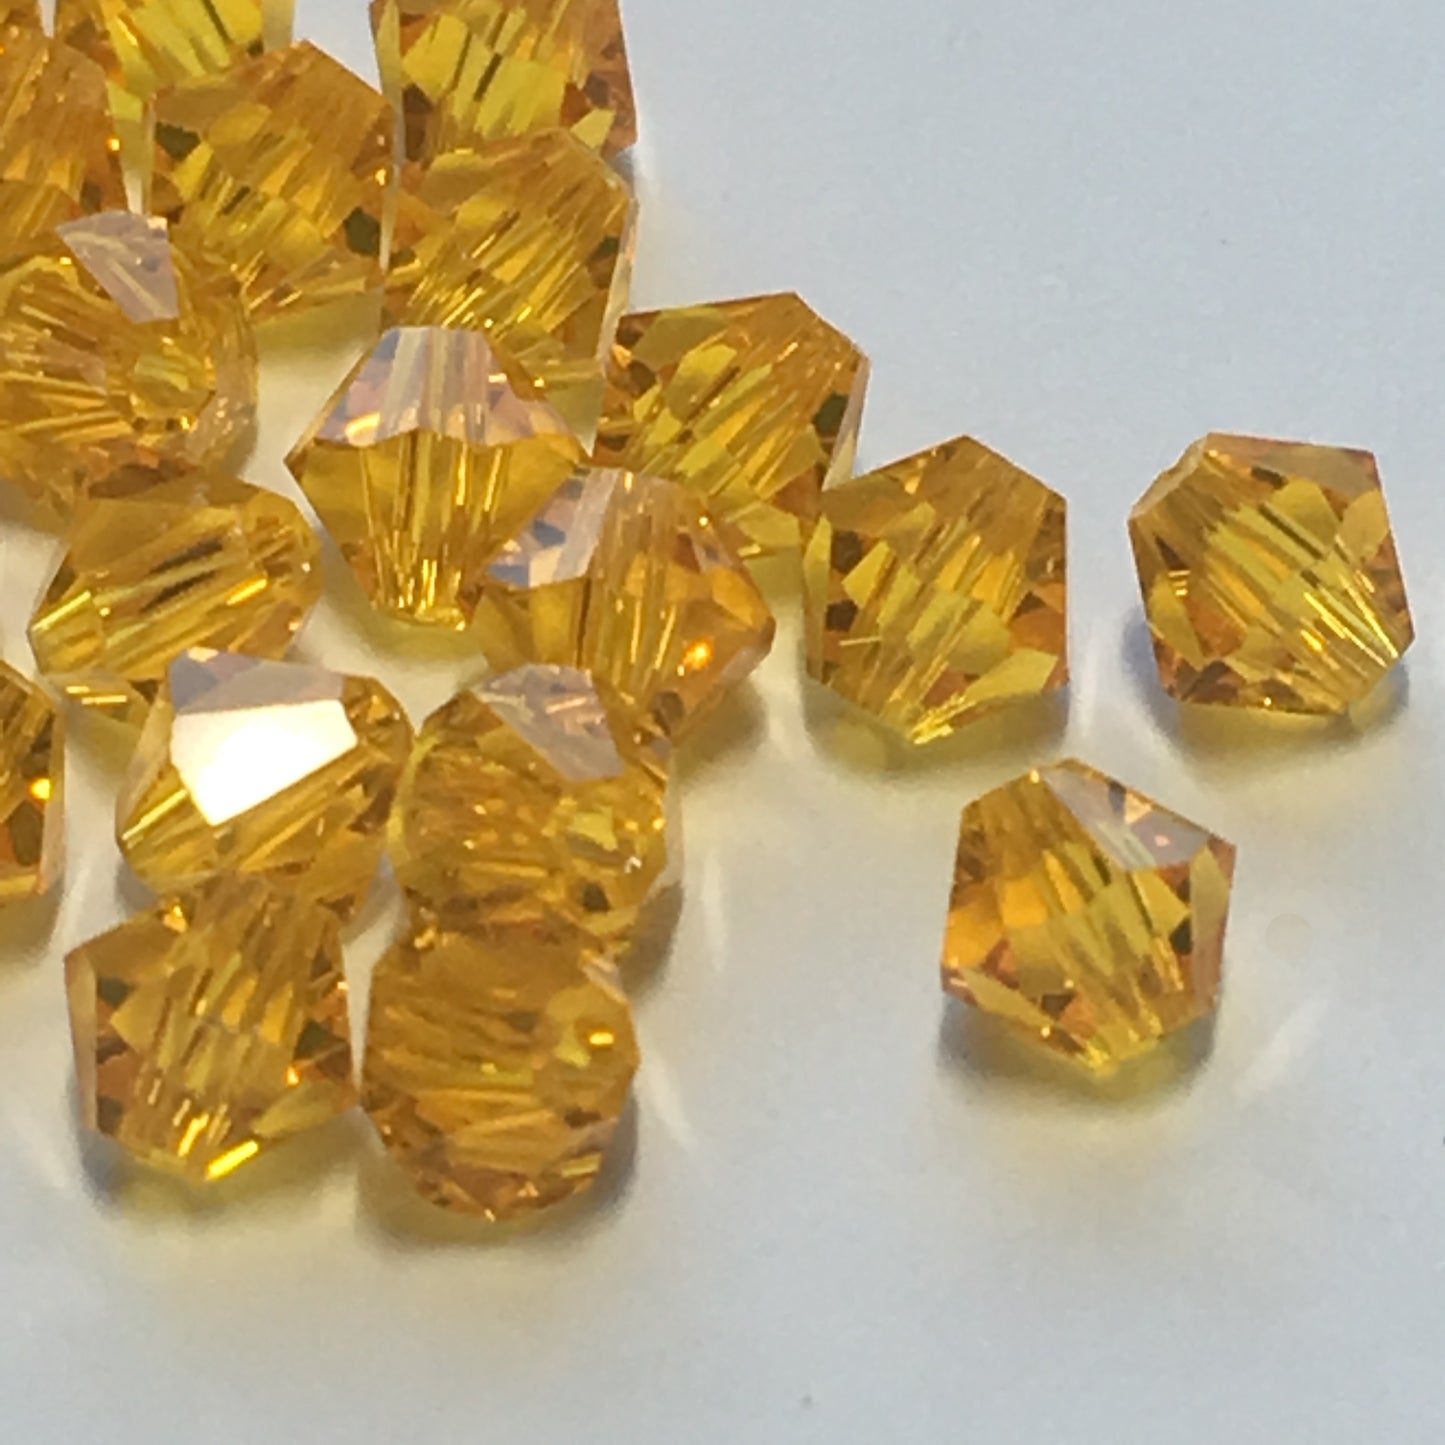 Transparent Topaz Faceted Bicone Crystal Beads, 3.5 mm - 33 Beads